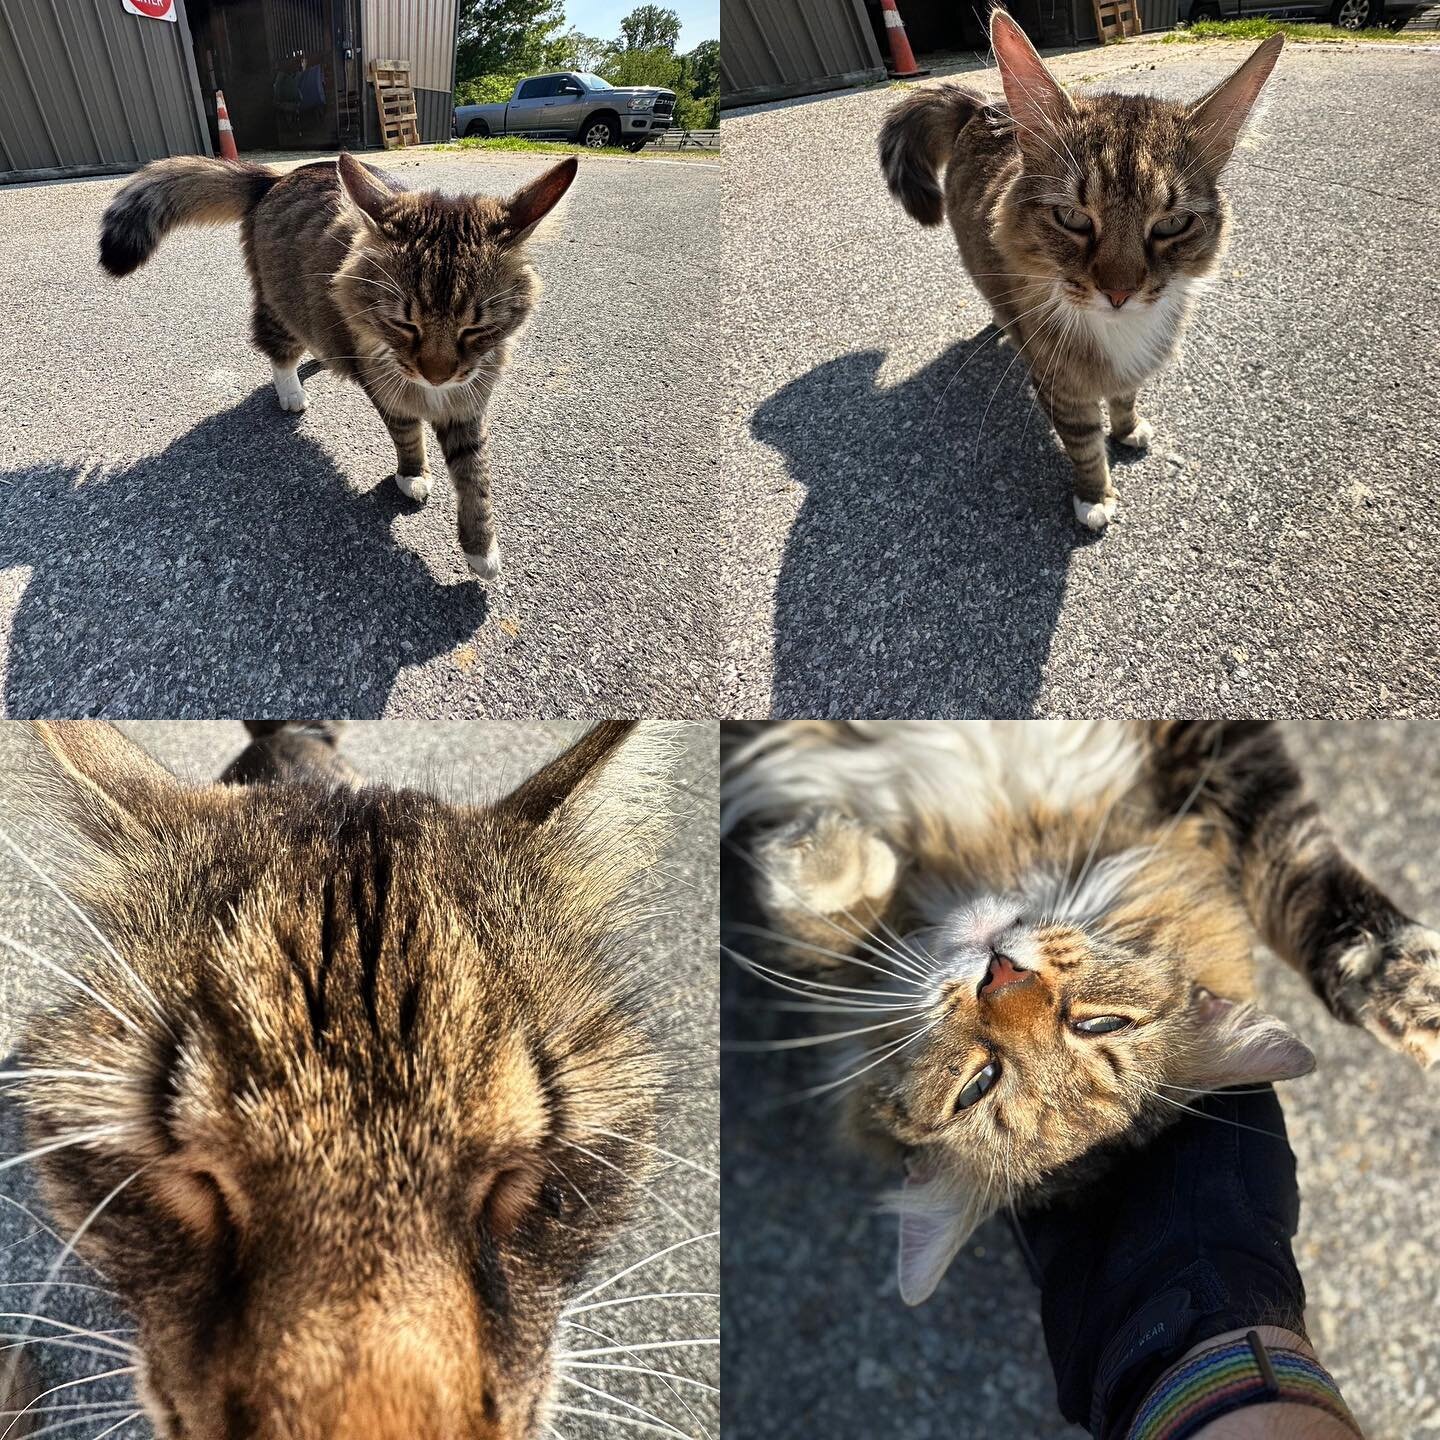 Making 🐱 friends 🐈 wherever we go. (Frame 5 may or may not depict some playful scratching and biting)